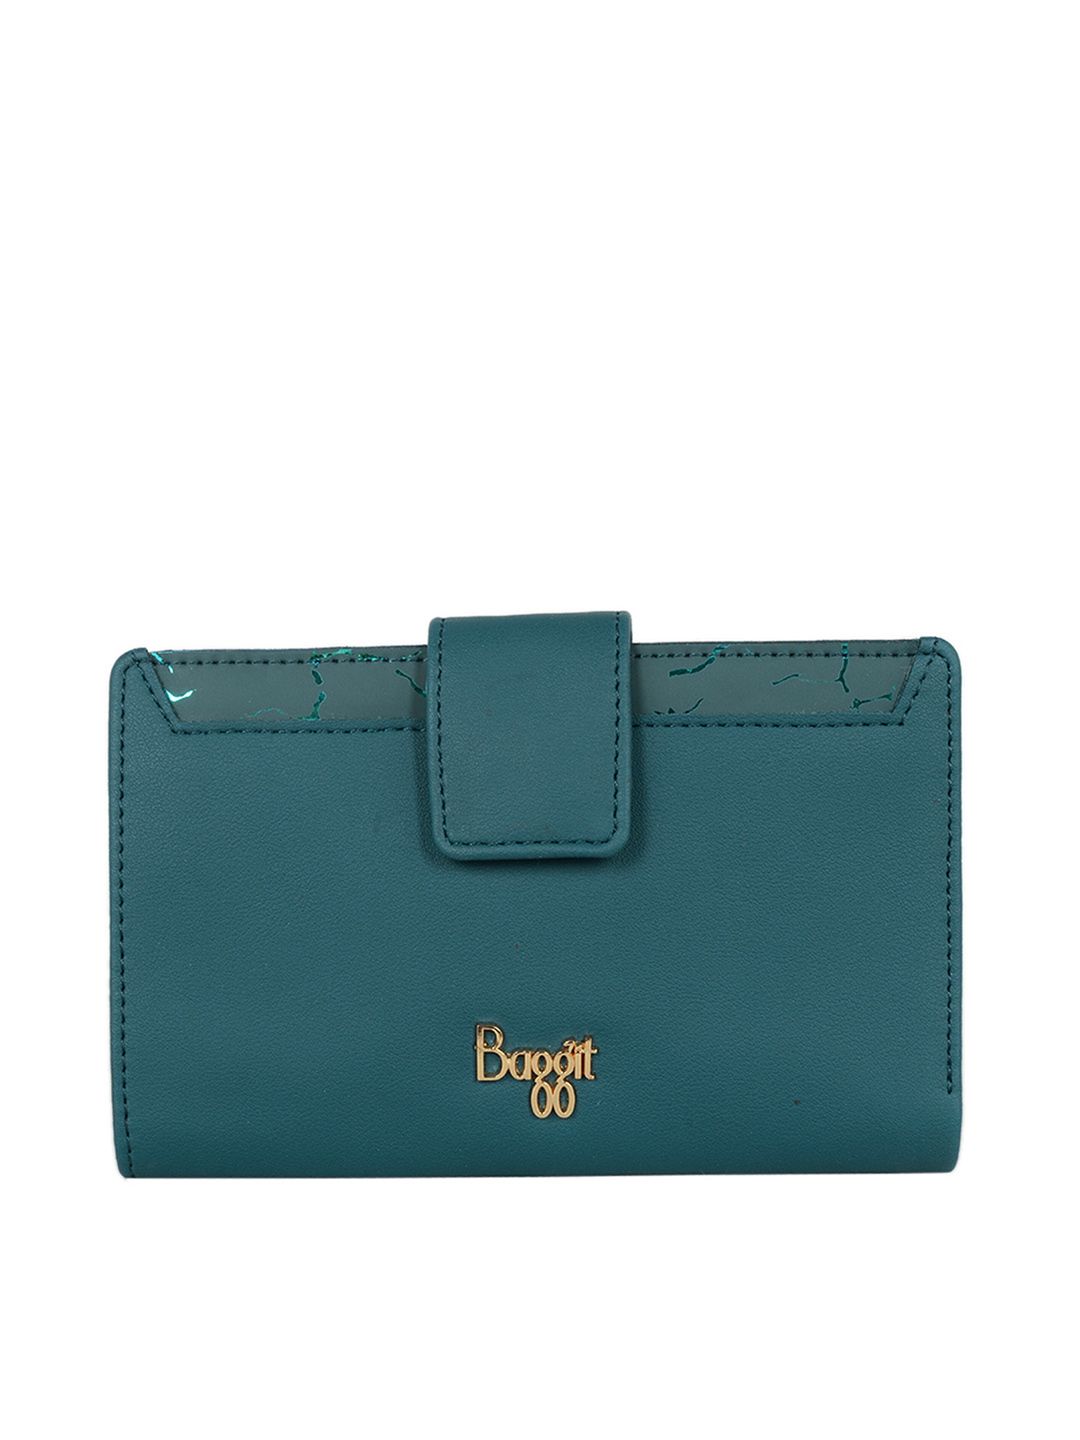 Baggit Women Teal Green Two Fold Wallet Price in India